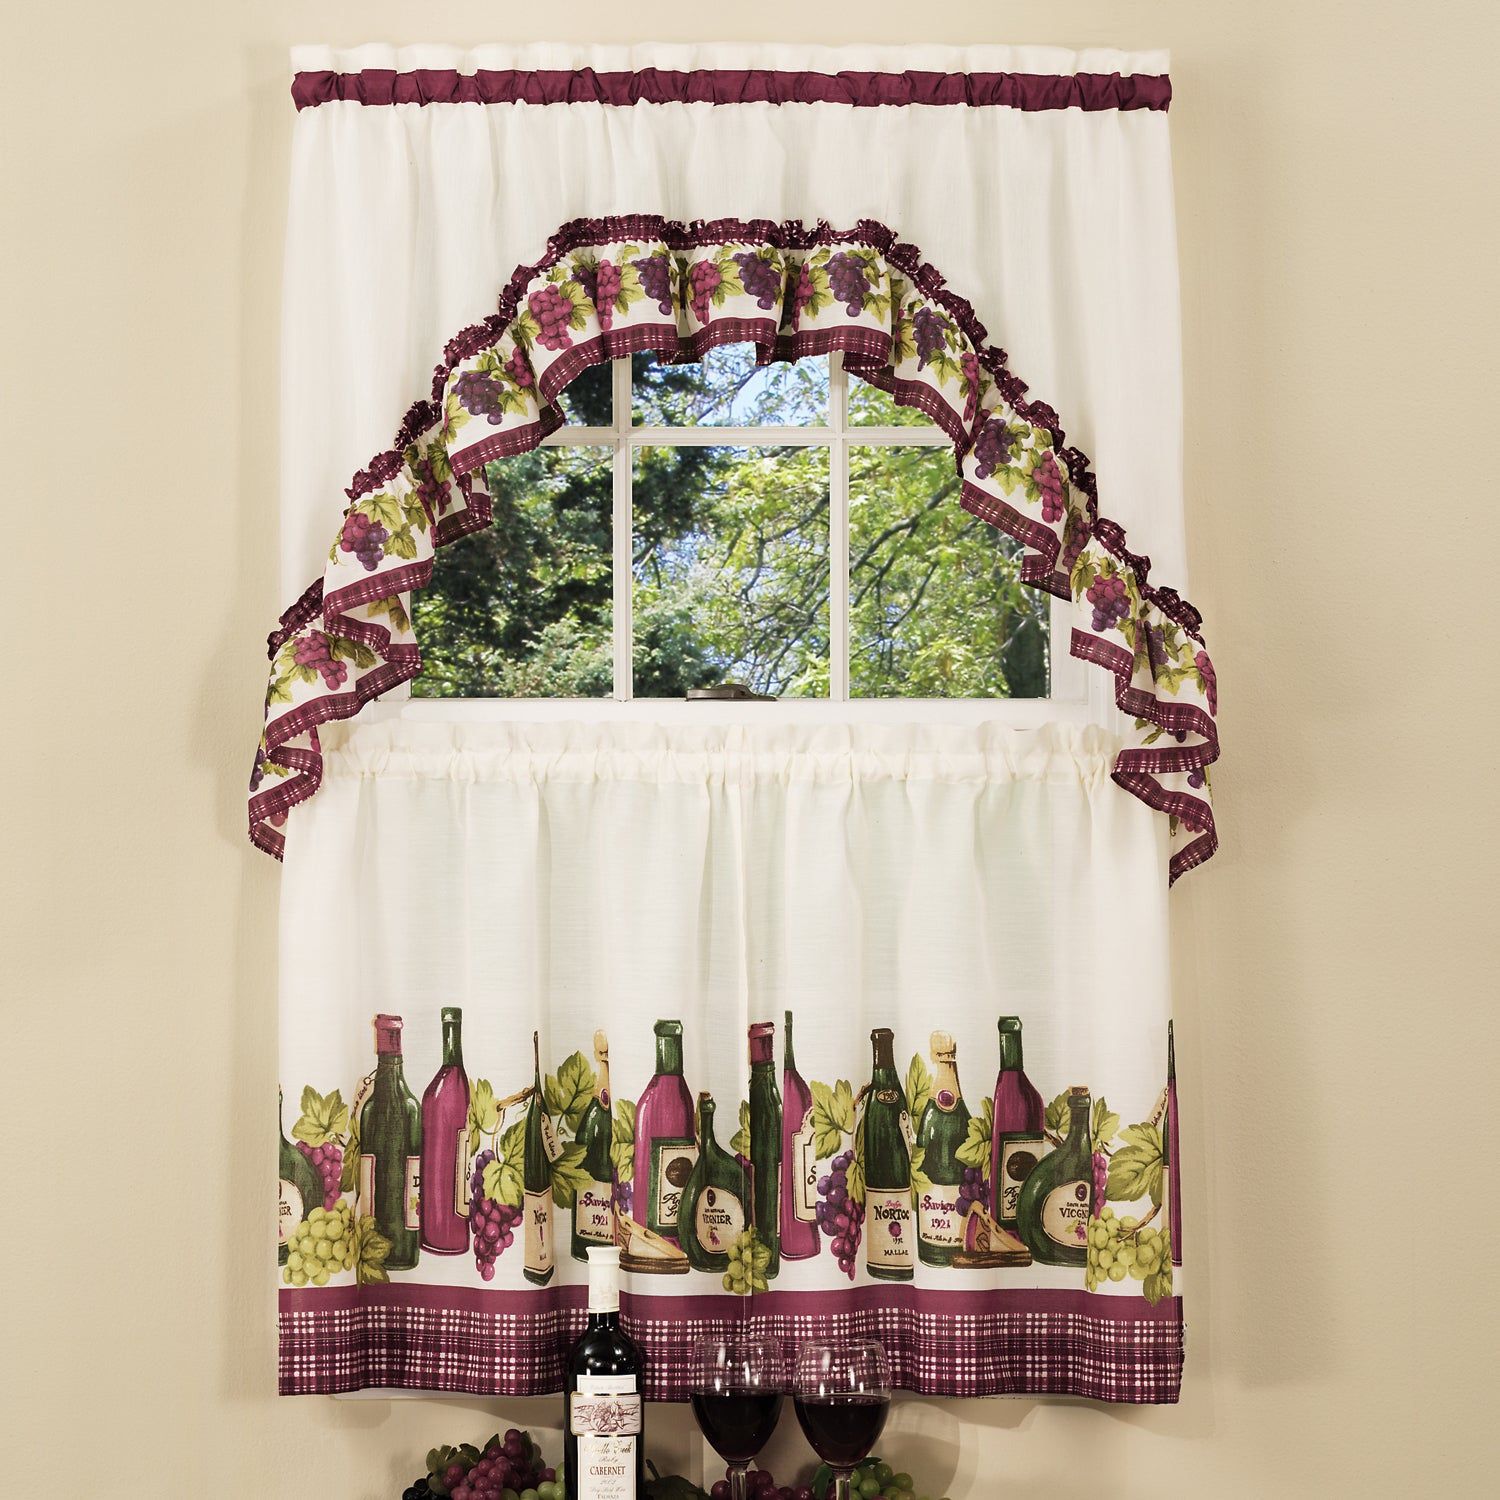 Traditional Two Piece Tailored Tier And Swag Window Curtains Set With  Classic French Wine And Grapes Print – 36 Inch Regarding 5 Piece Burgundy Embroidered Cabernet Kitchen Curtain Sets (View 3 of 20)